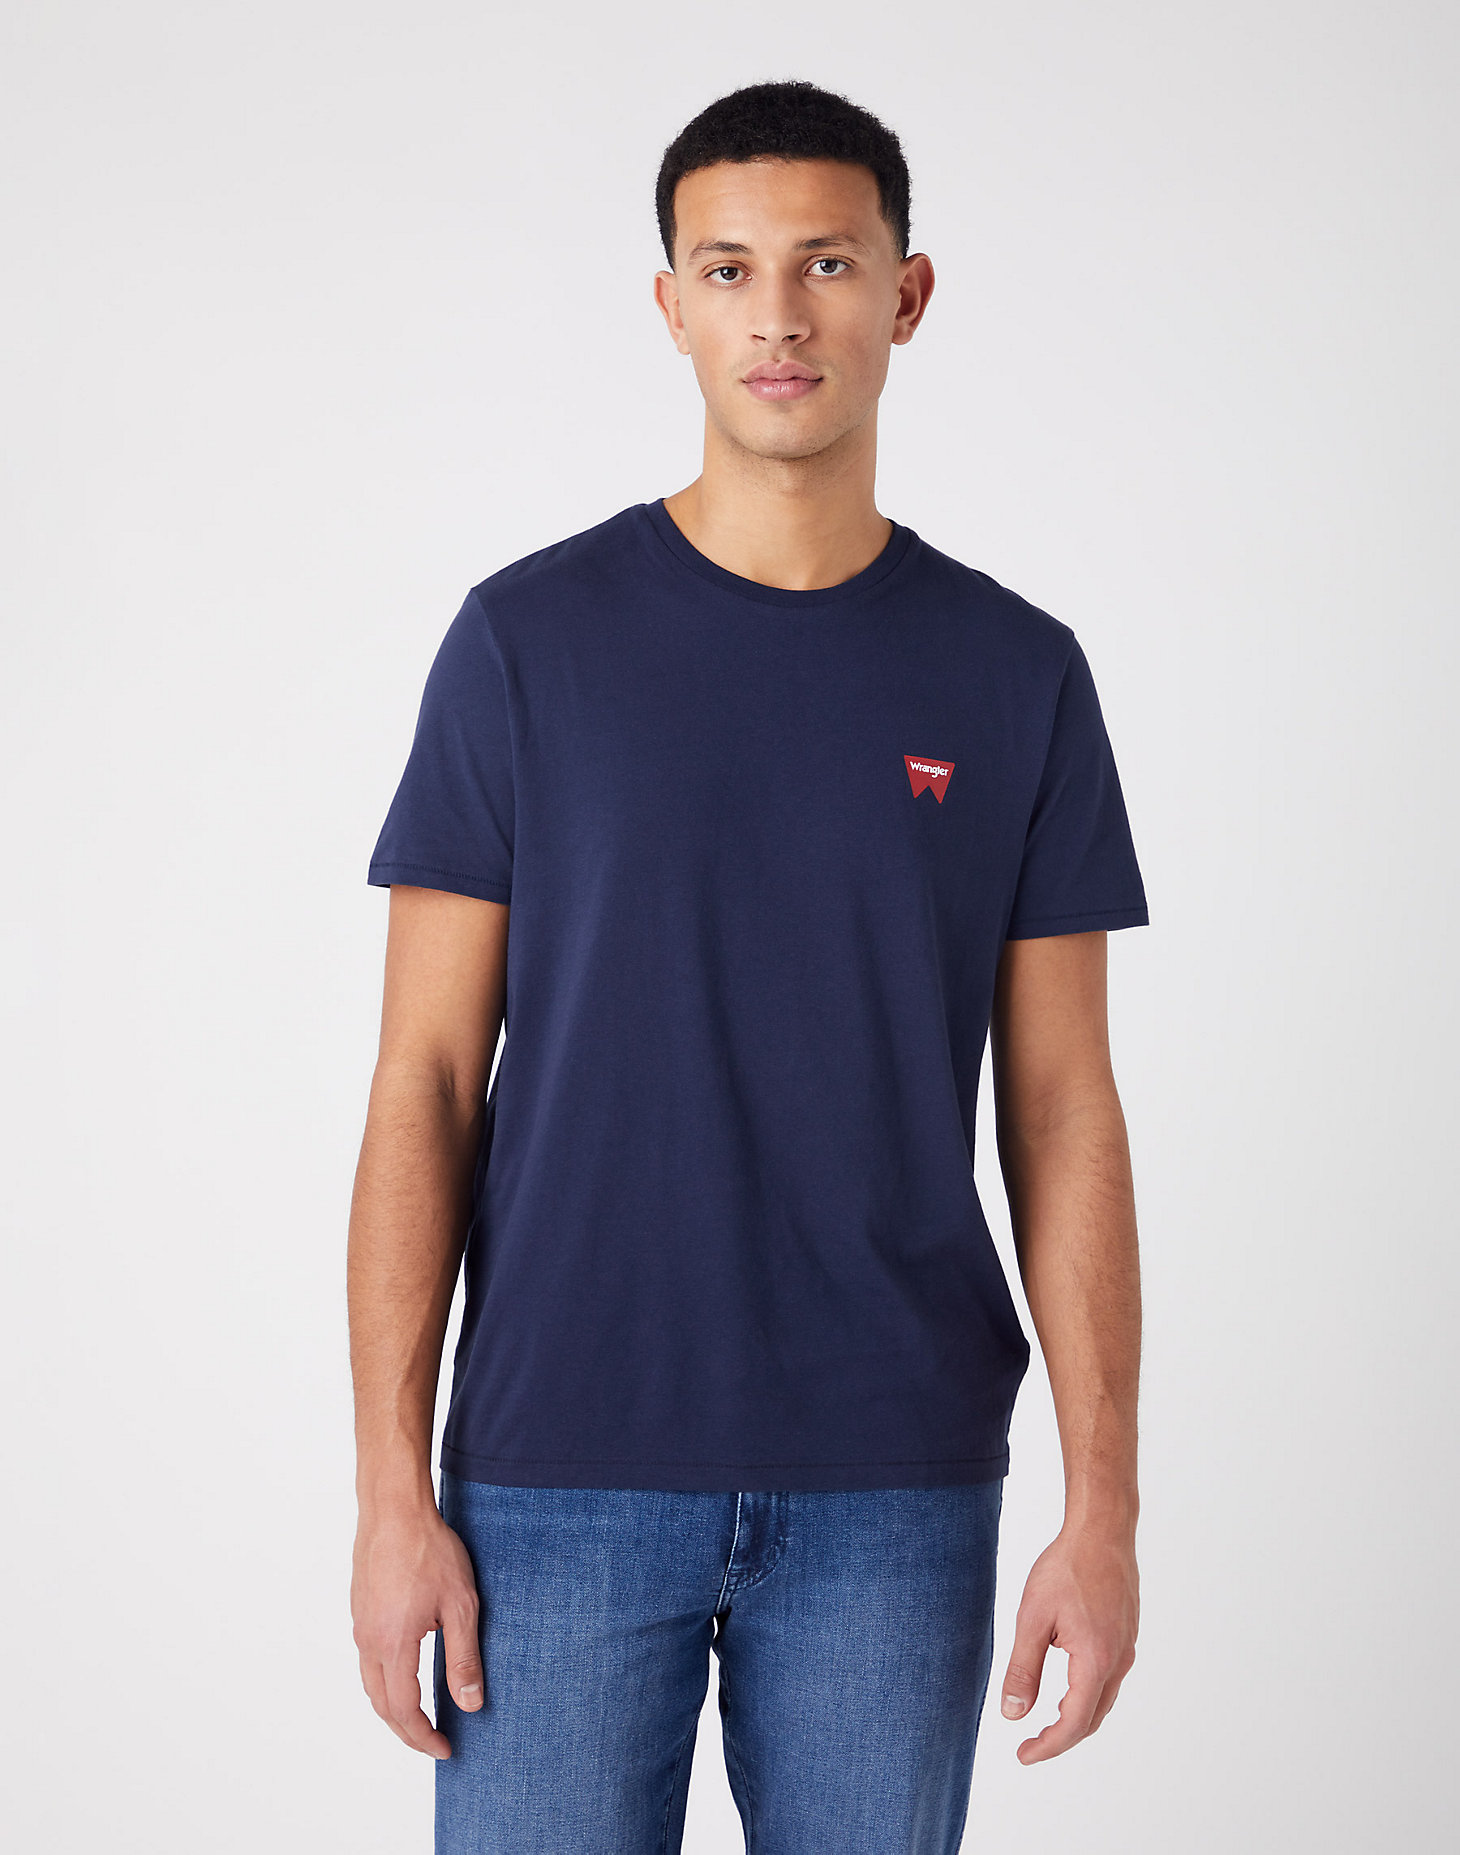 Sign Off Tee in Navy main view